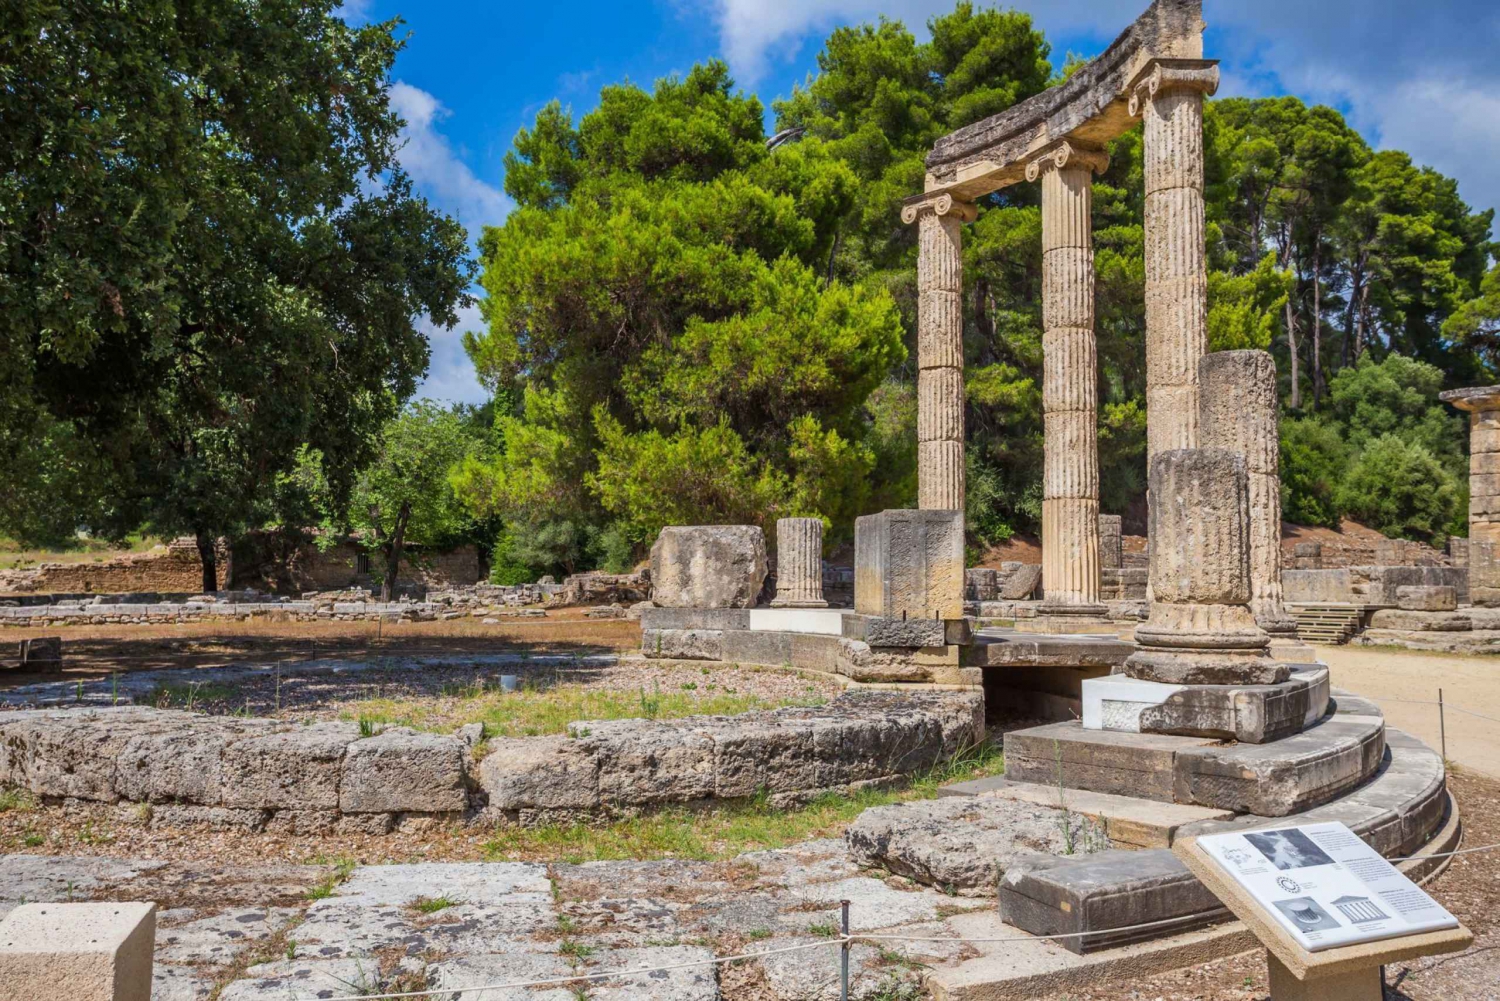 From Athens: Full-Day Private Round Trip to Ancient Olympia